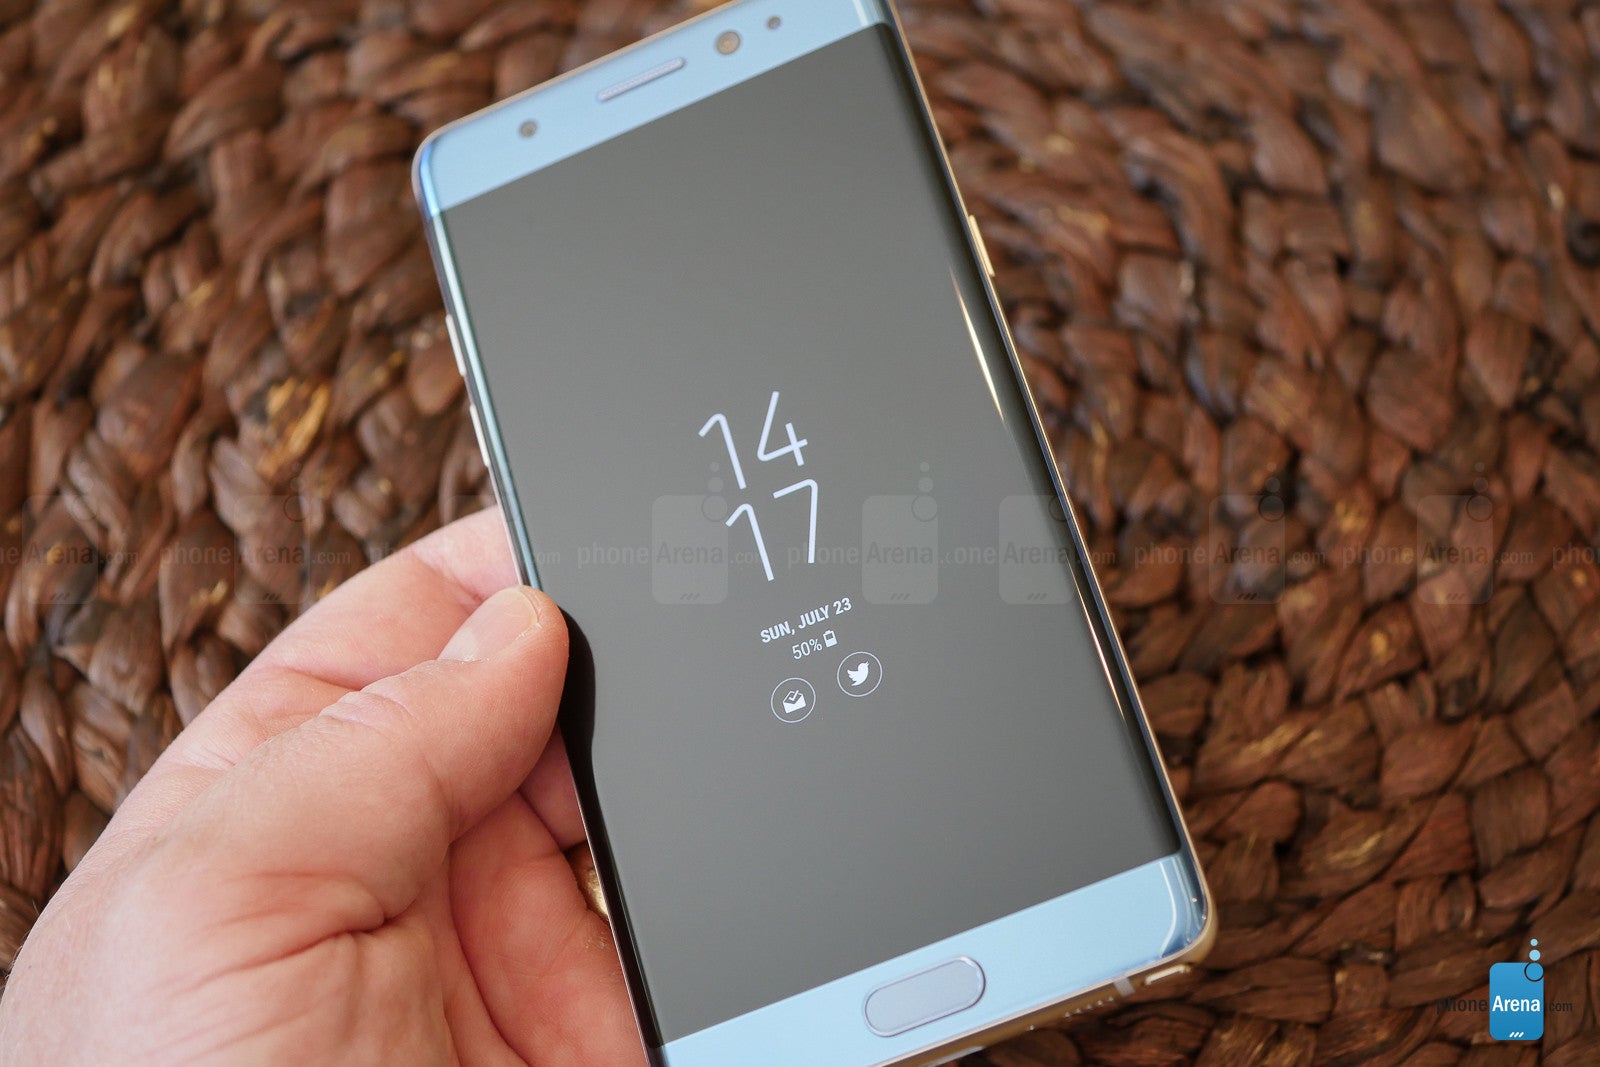 Samsung Galaxy Note FE (Fan Edition) Review